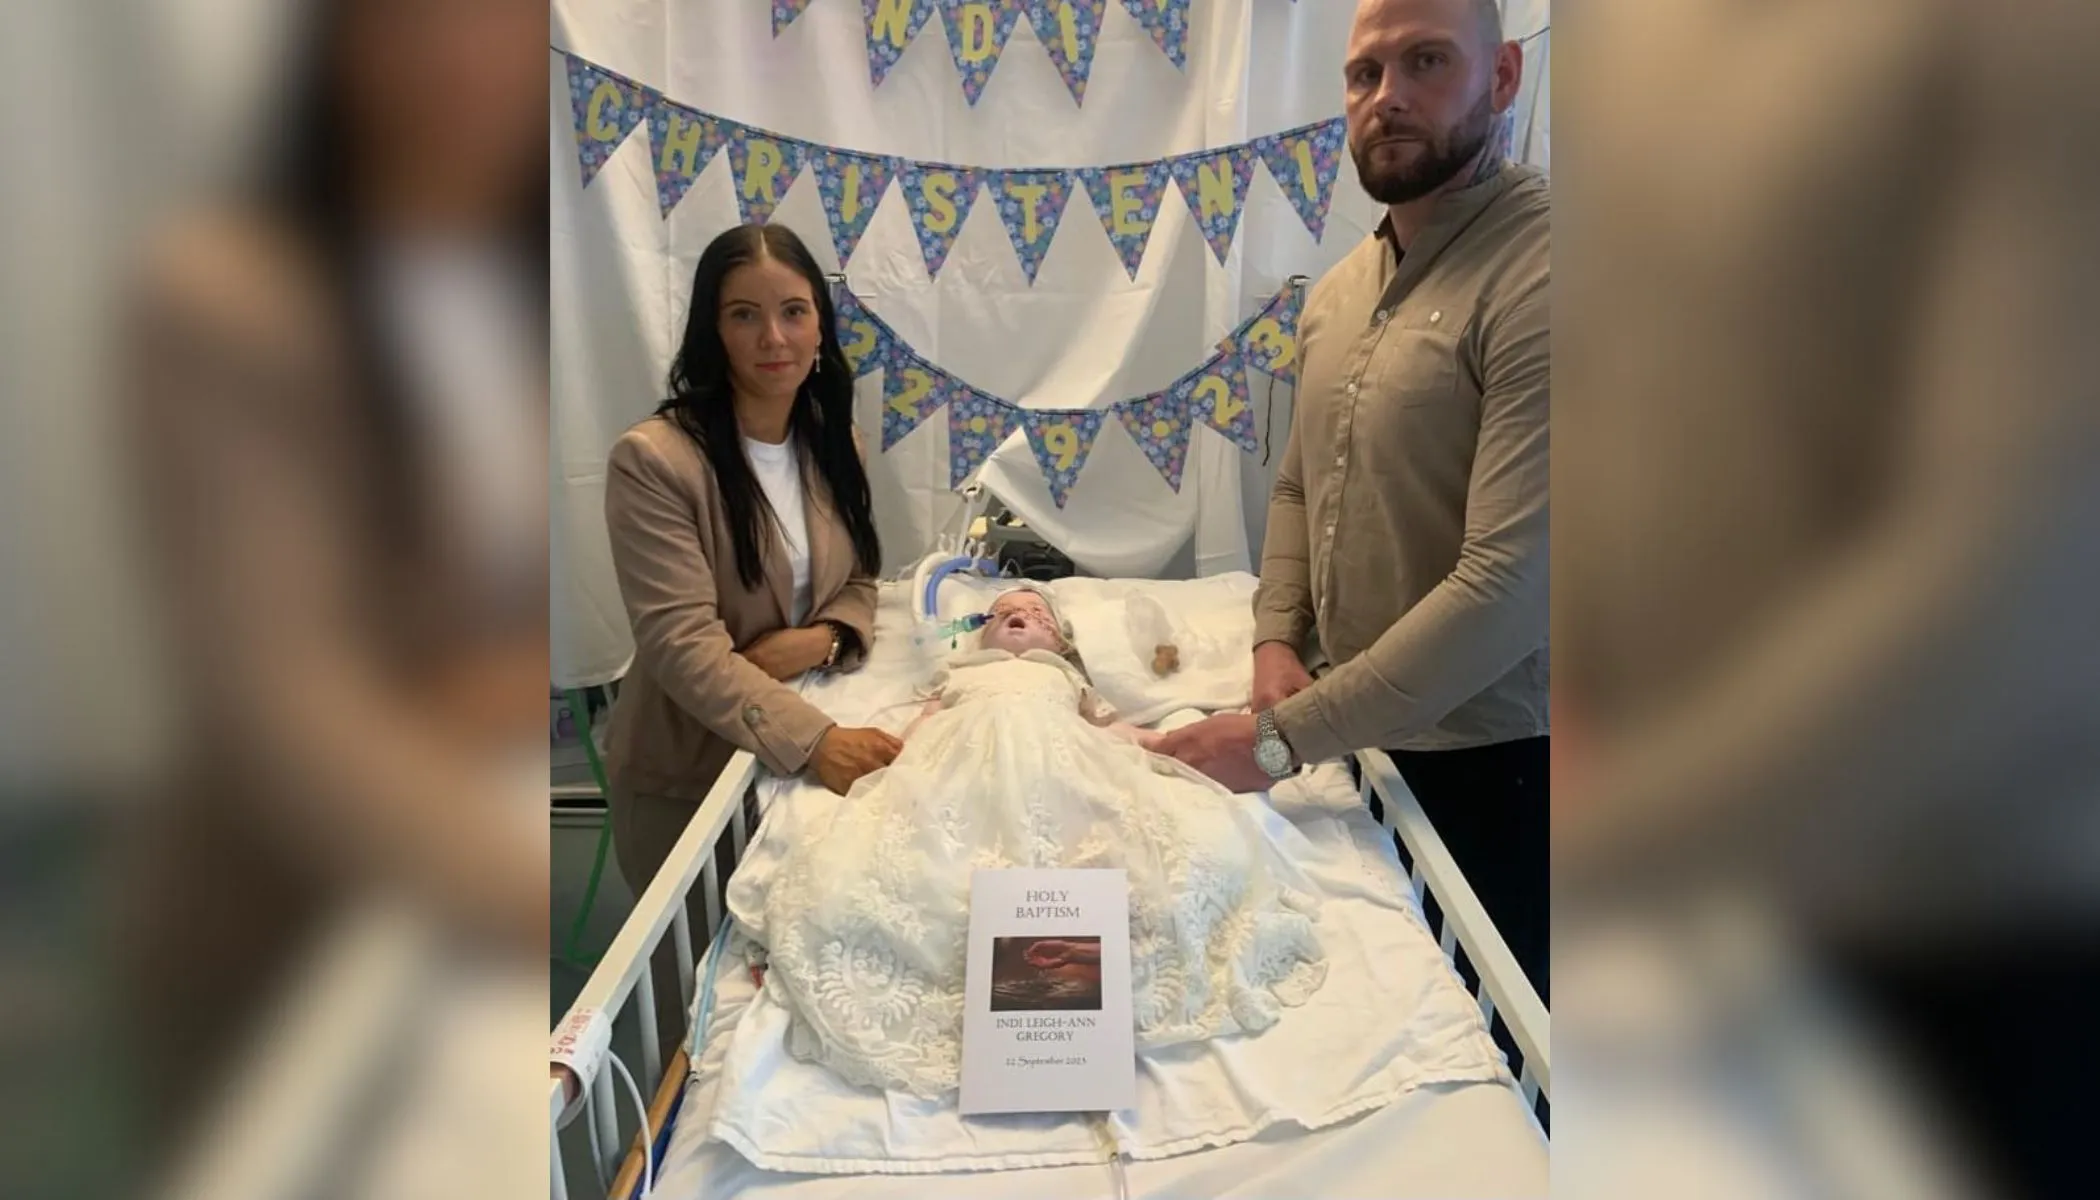 Baby Indi Gregory was baptized on Sept. 22, 2023. Despite not being religious, Dean Gregory, her father, expressed that his time in court fighting for his daughter’s life felt like he had been “dragged to hell.” The experience moved him to decide to have his daughter baptized.?w=200&h=150